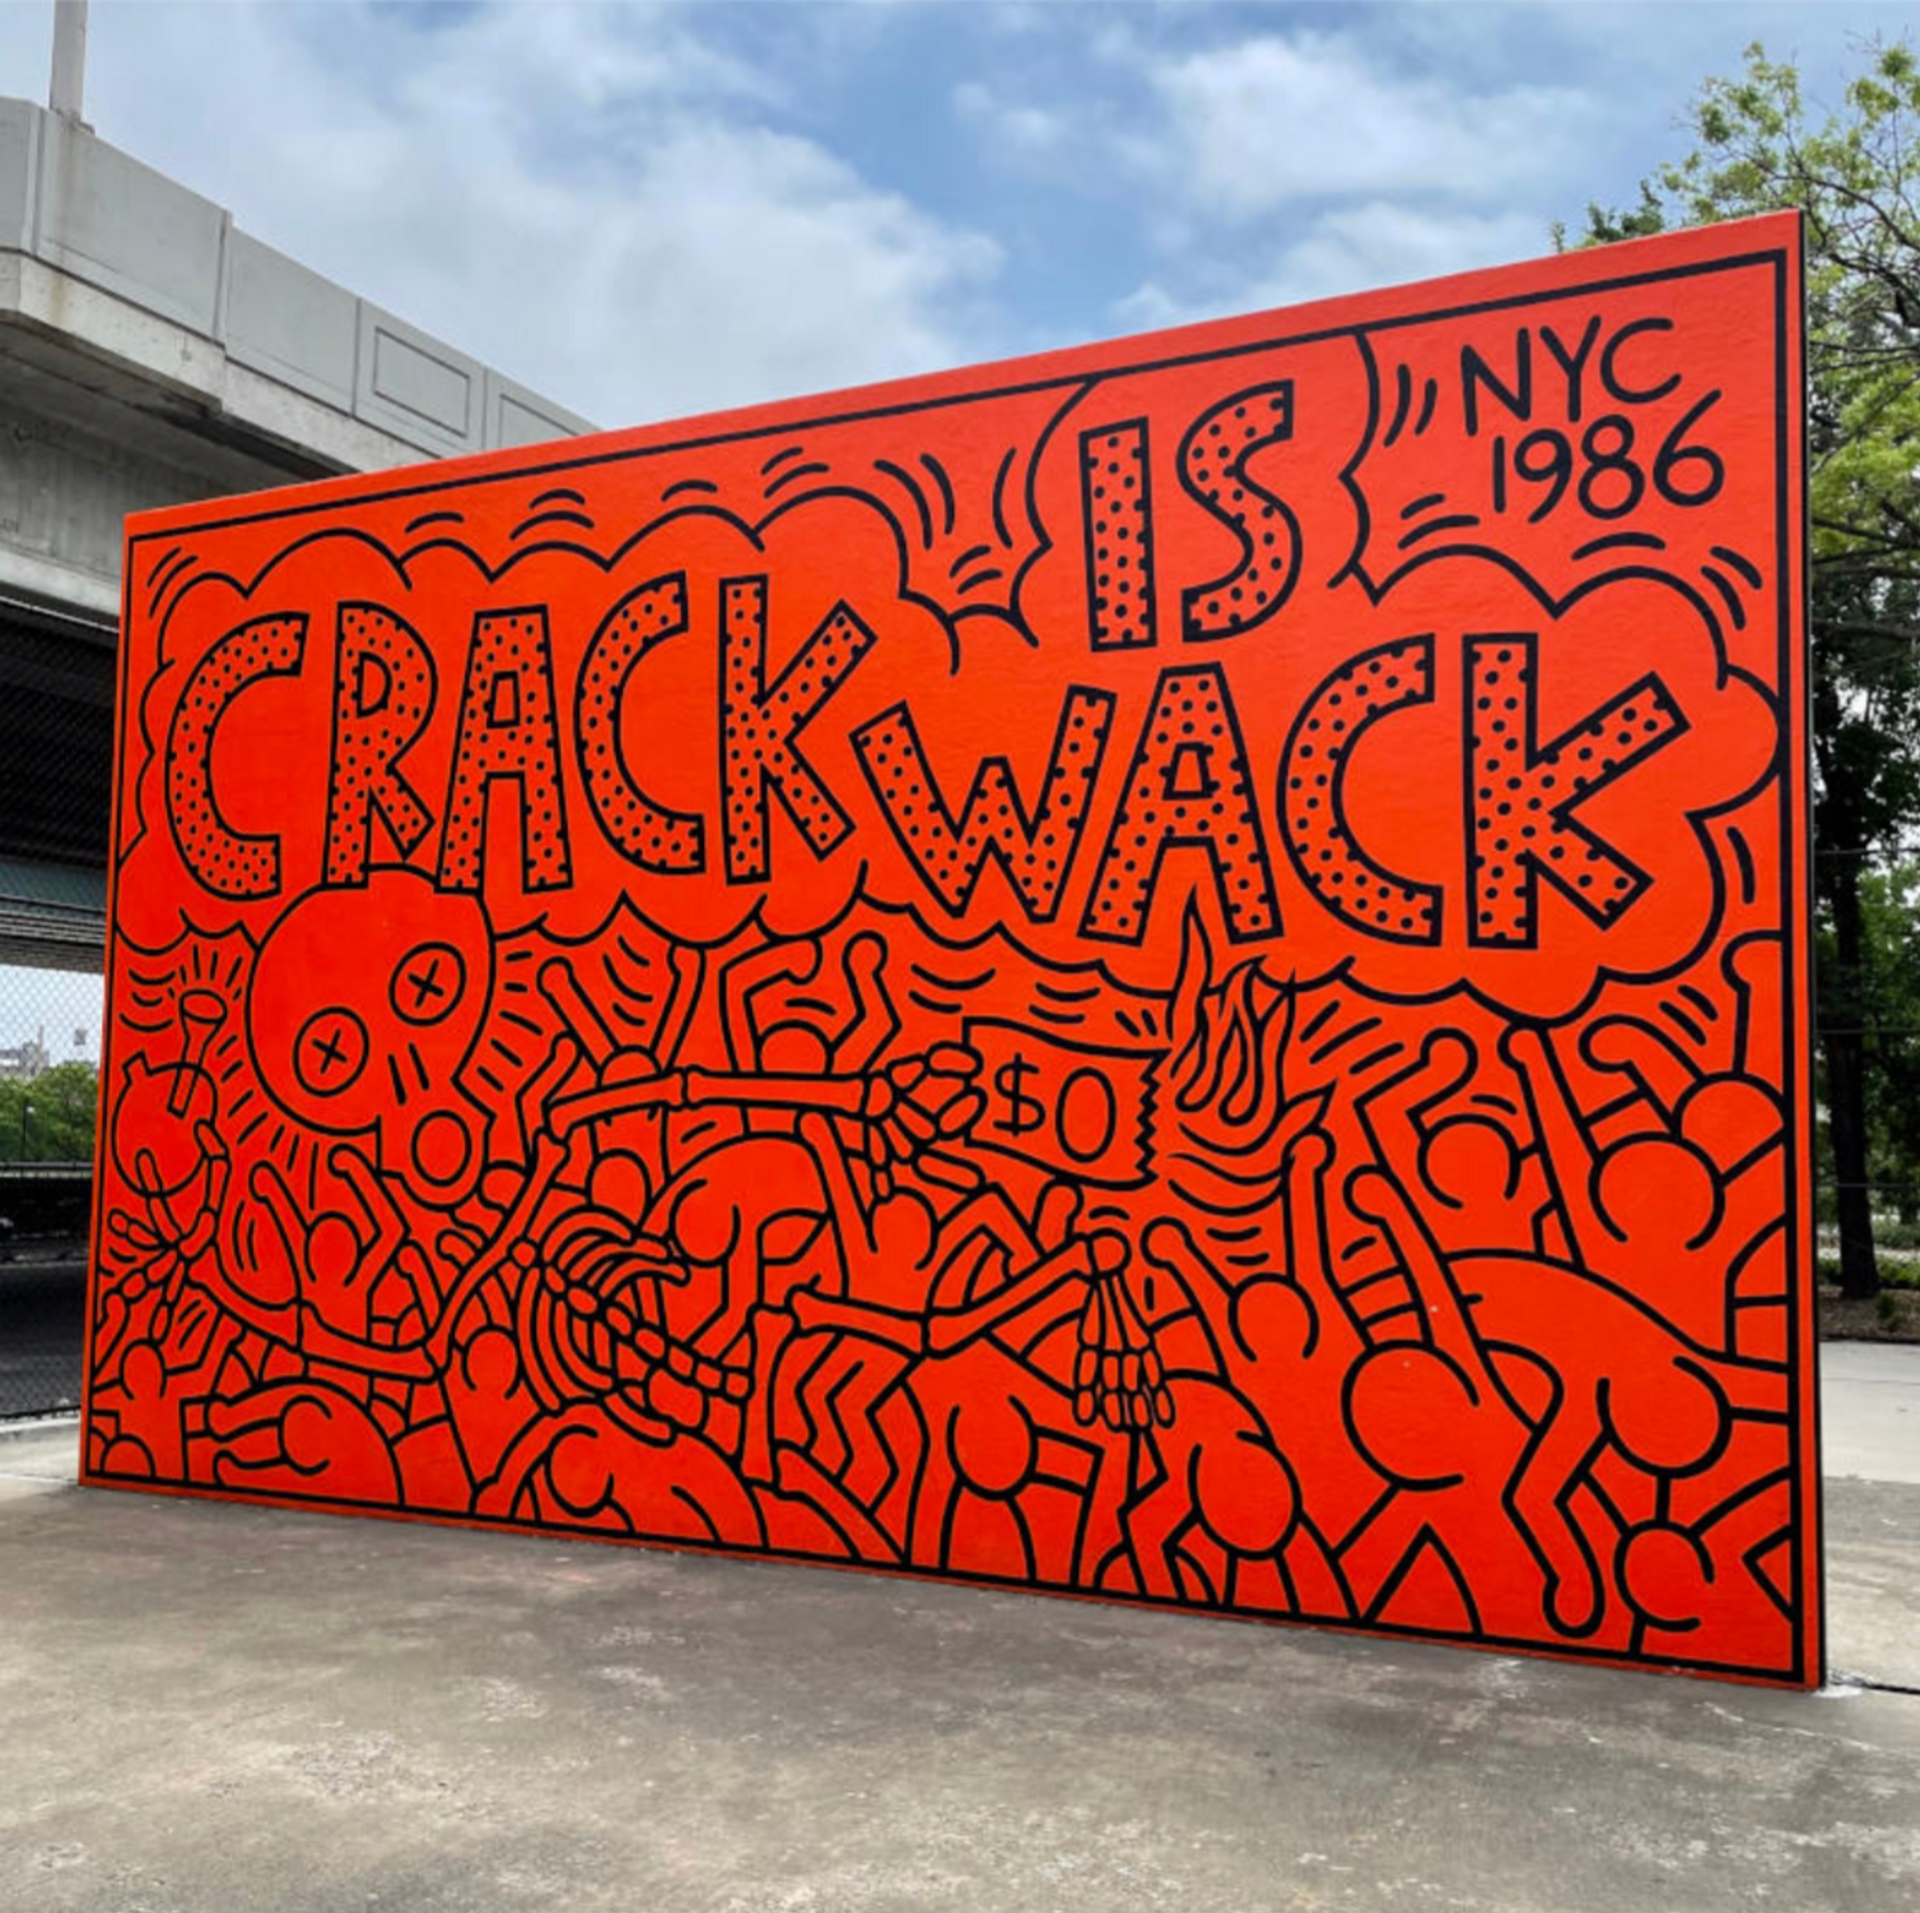 Image © NYC LGBT Historic Sites Project / Crack is Wack by Keith Haring © Amanda Davis 2022